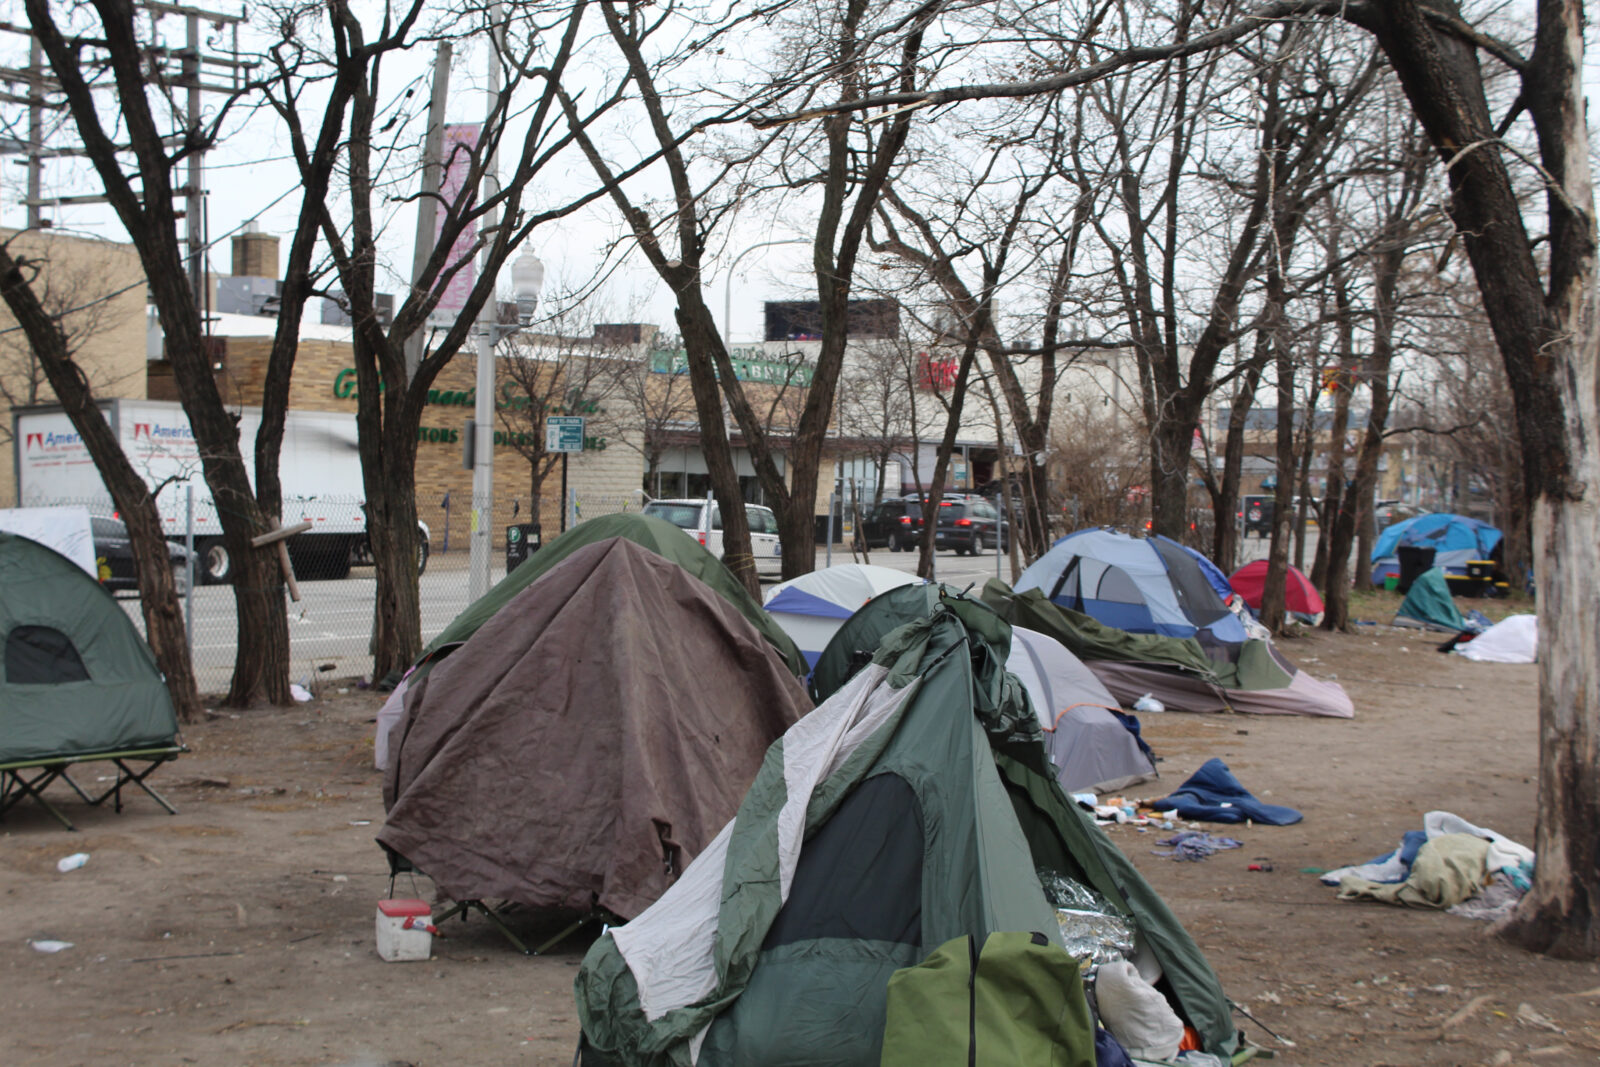 Homeless person tent city on Chicago's Near West Side